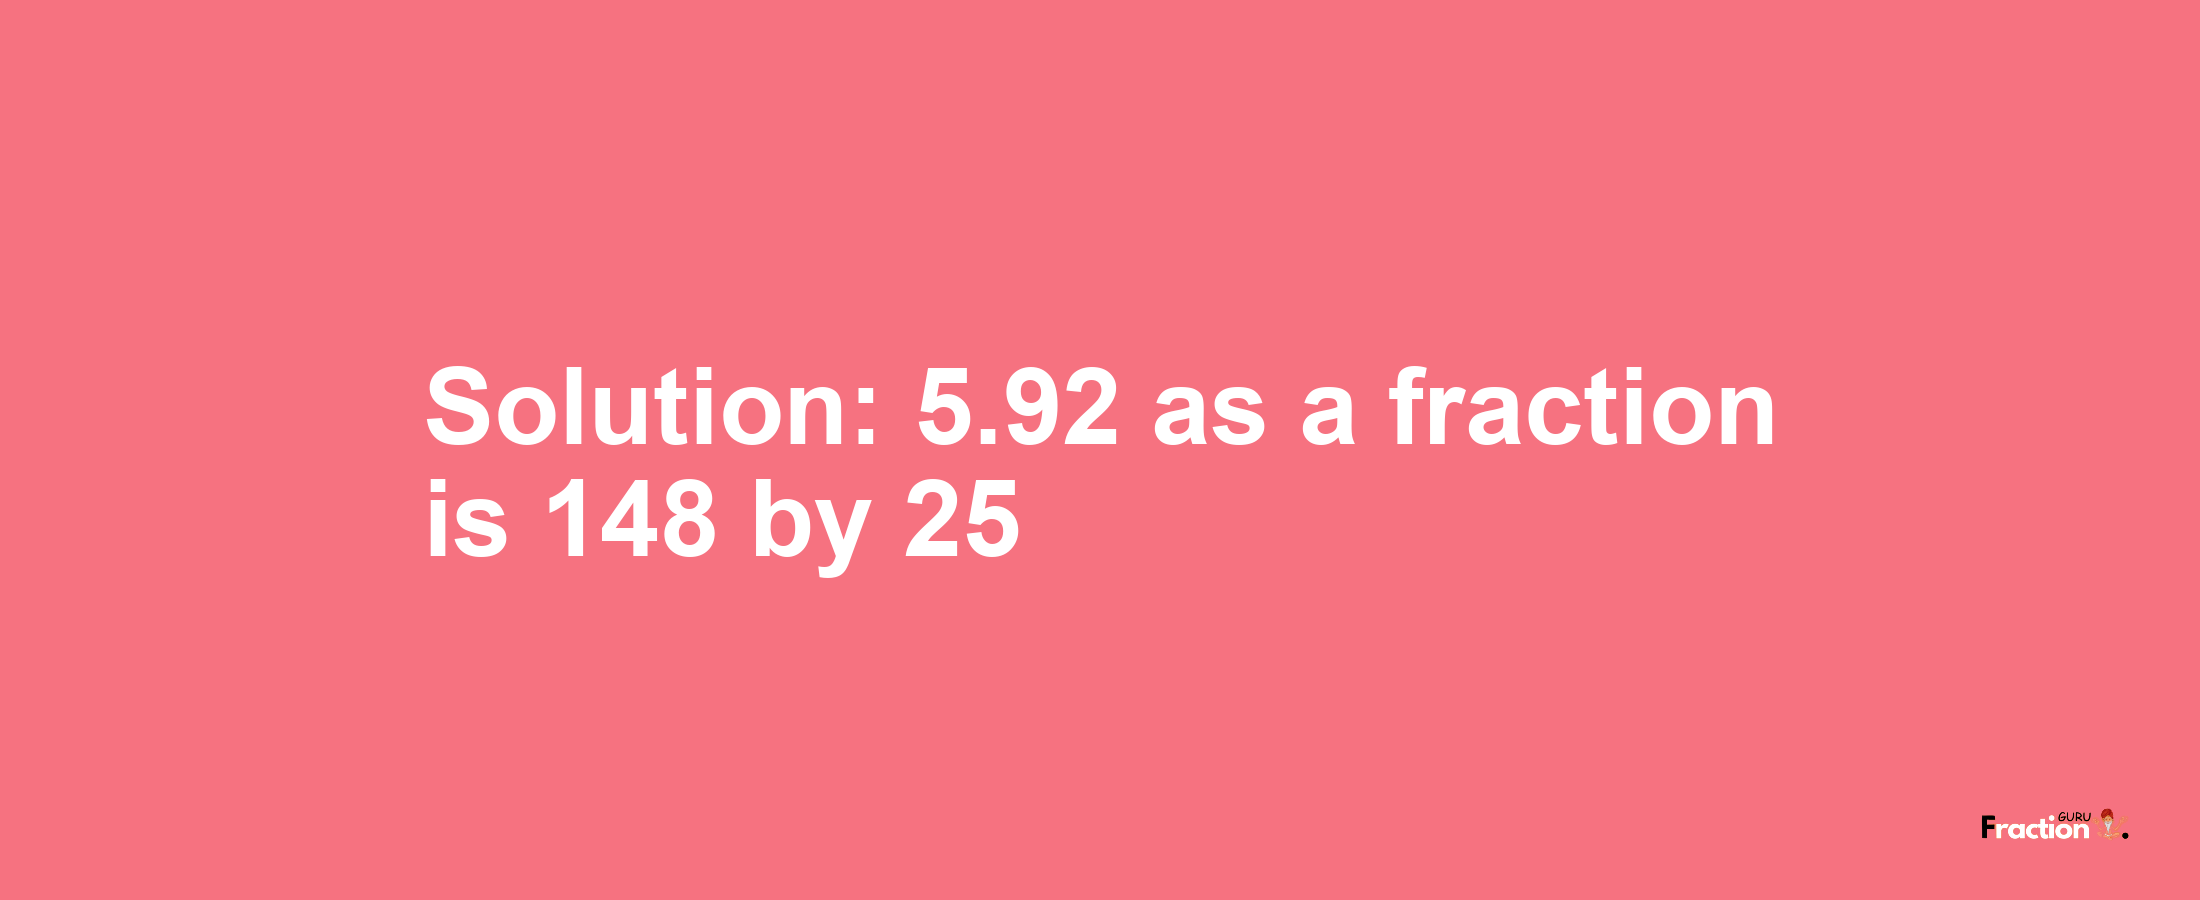 Solution:5.92 as a fraction is 148/25